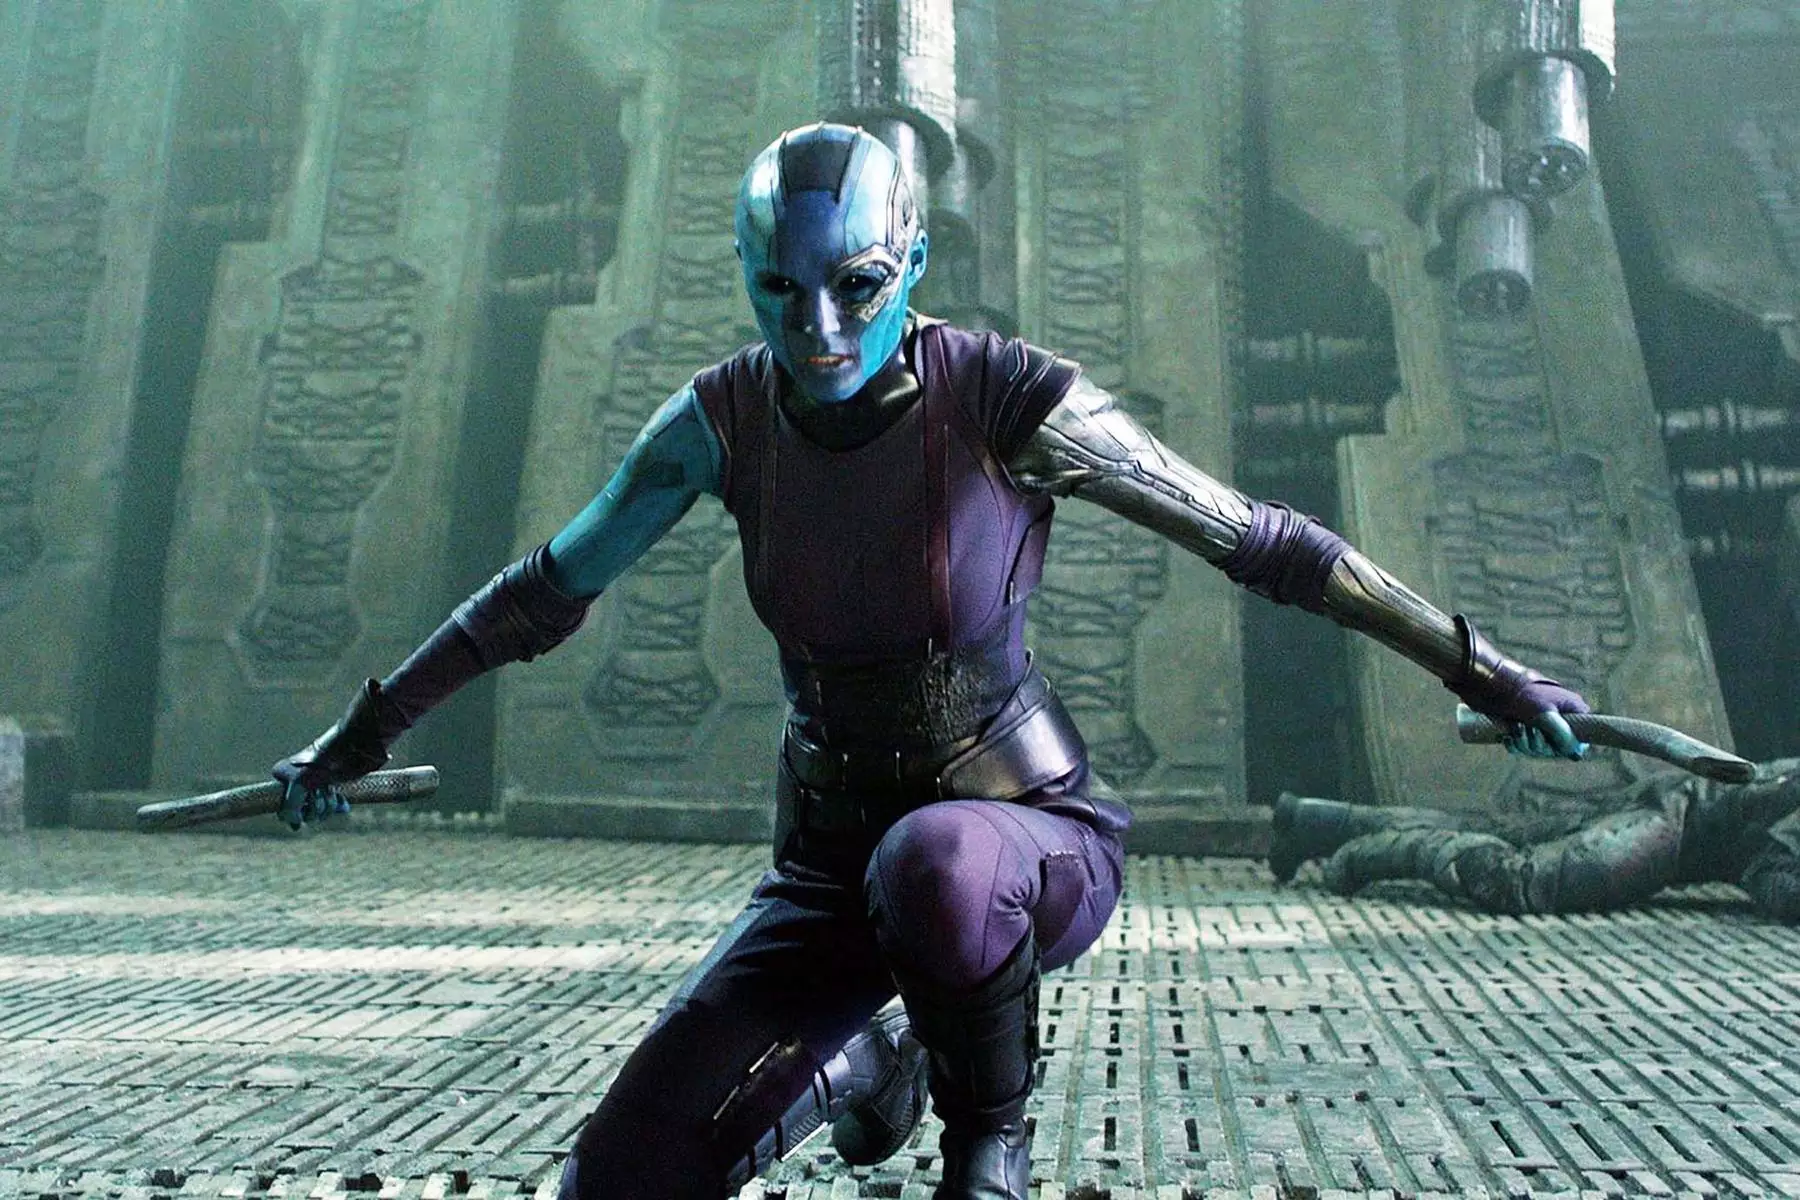 Gillan says her get-up as Nebula affects her portrayal of the character.